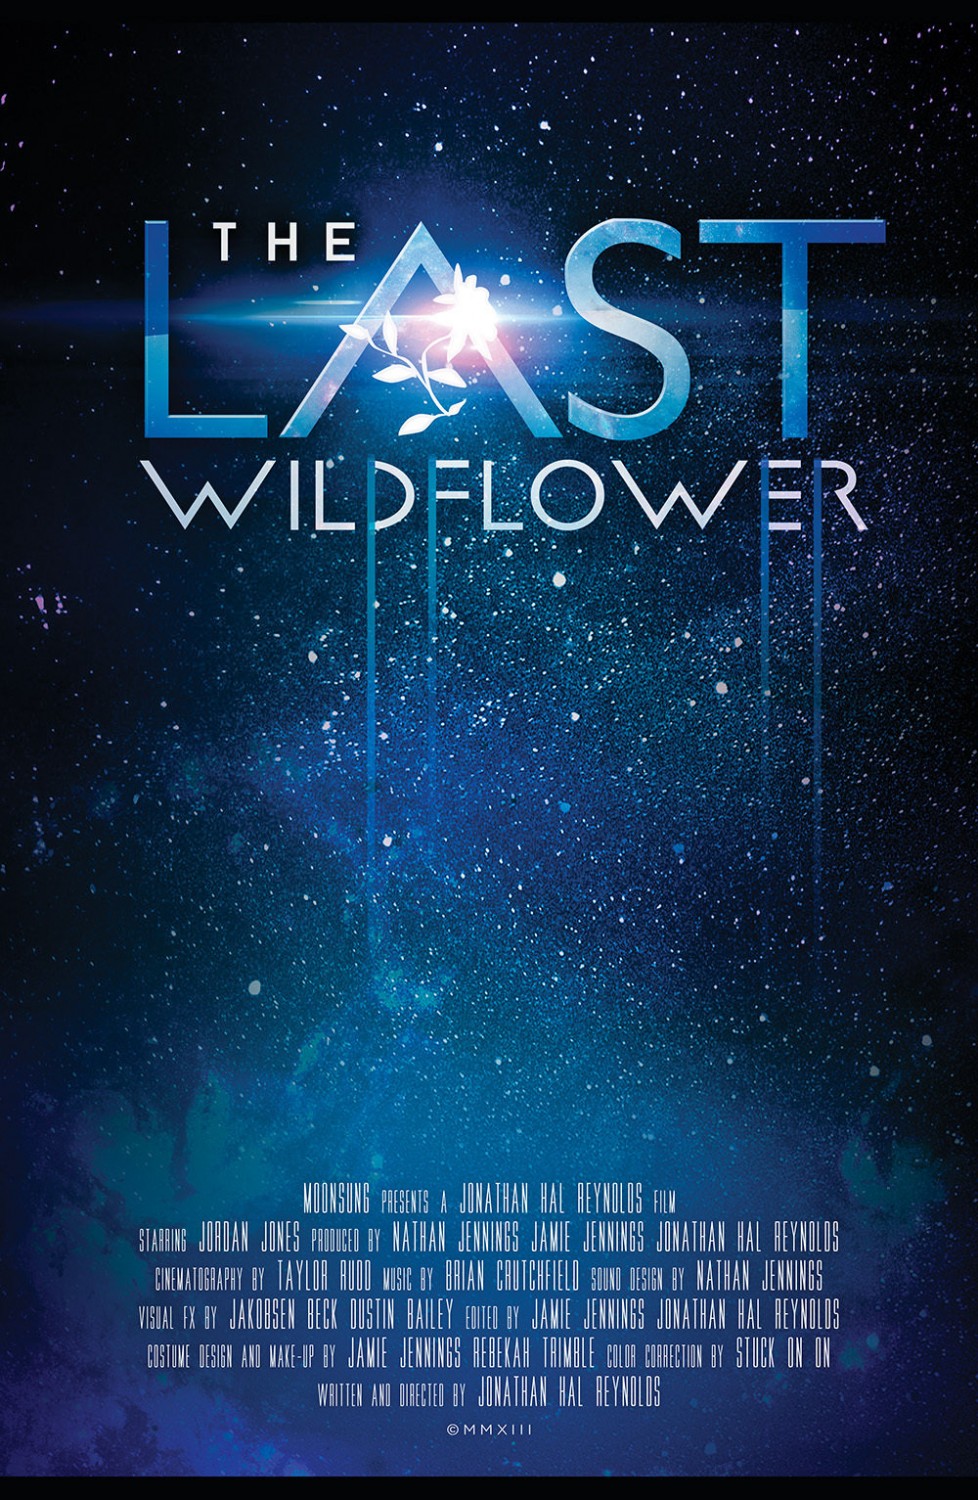 Extra Large Movie Poster Image for The Last Wildflower